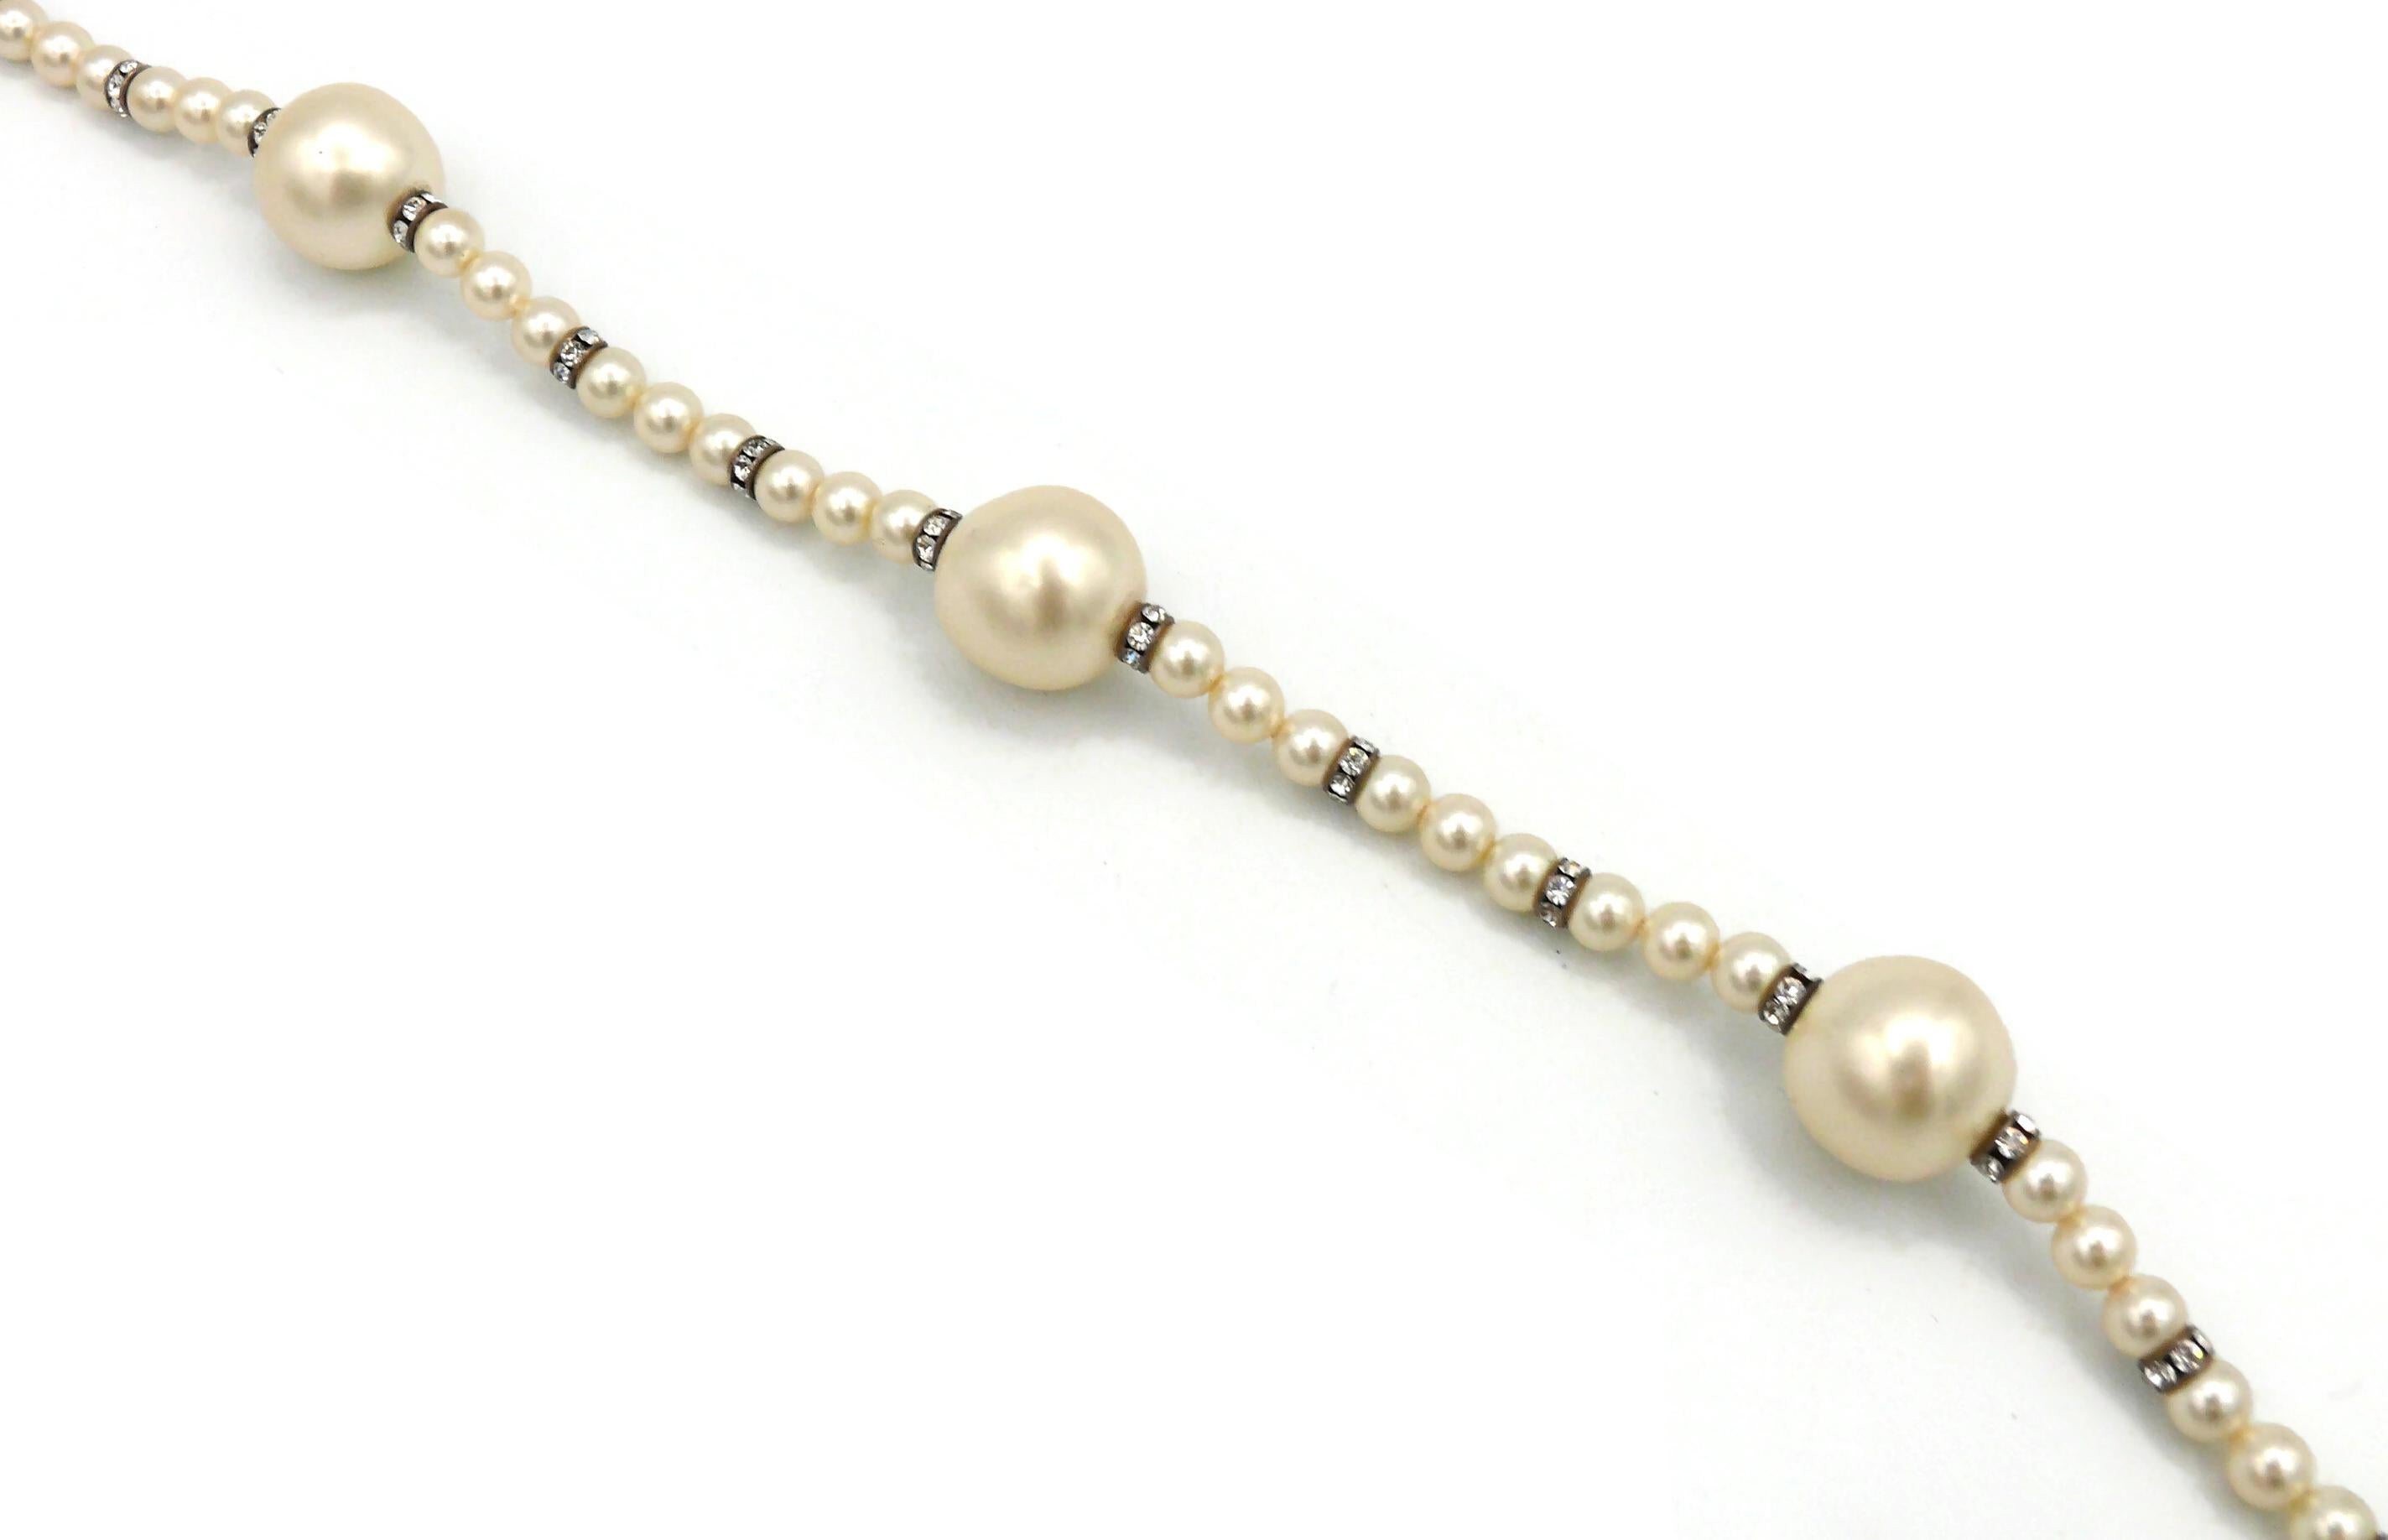 CHANEL by KARL LAGERFELD Vintage Faux Pearl and Crystal Necklace, Fall 1993 For Sale 7